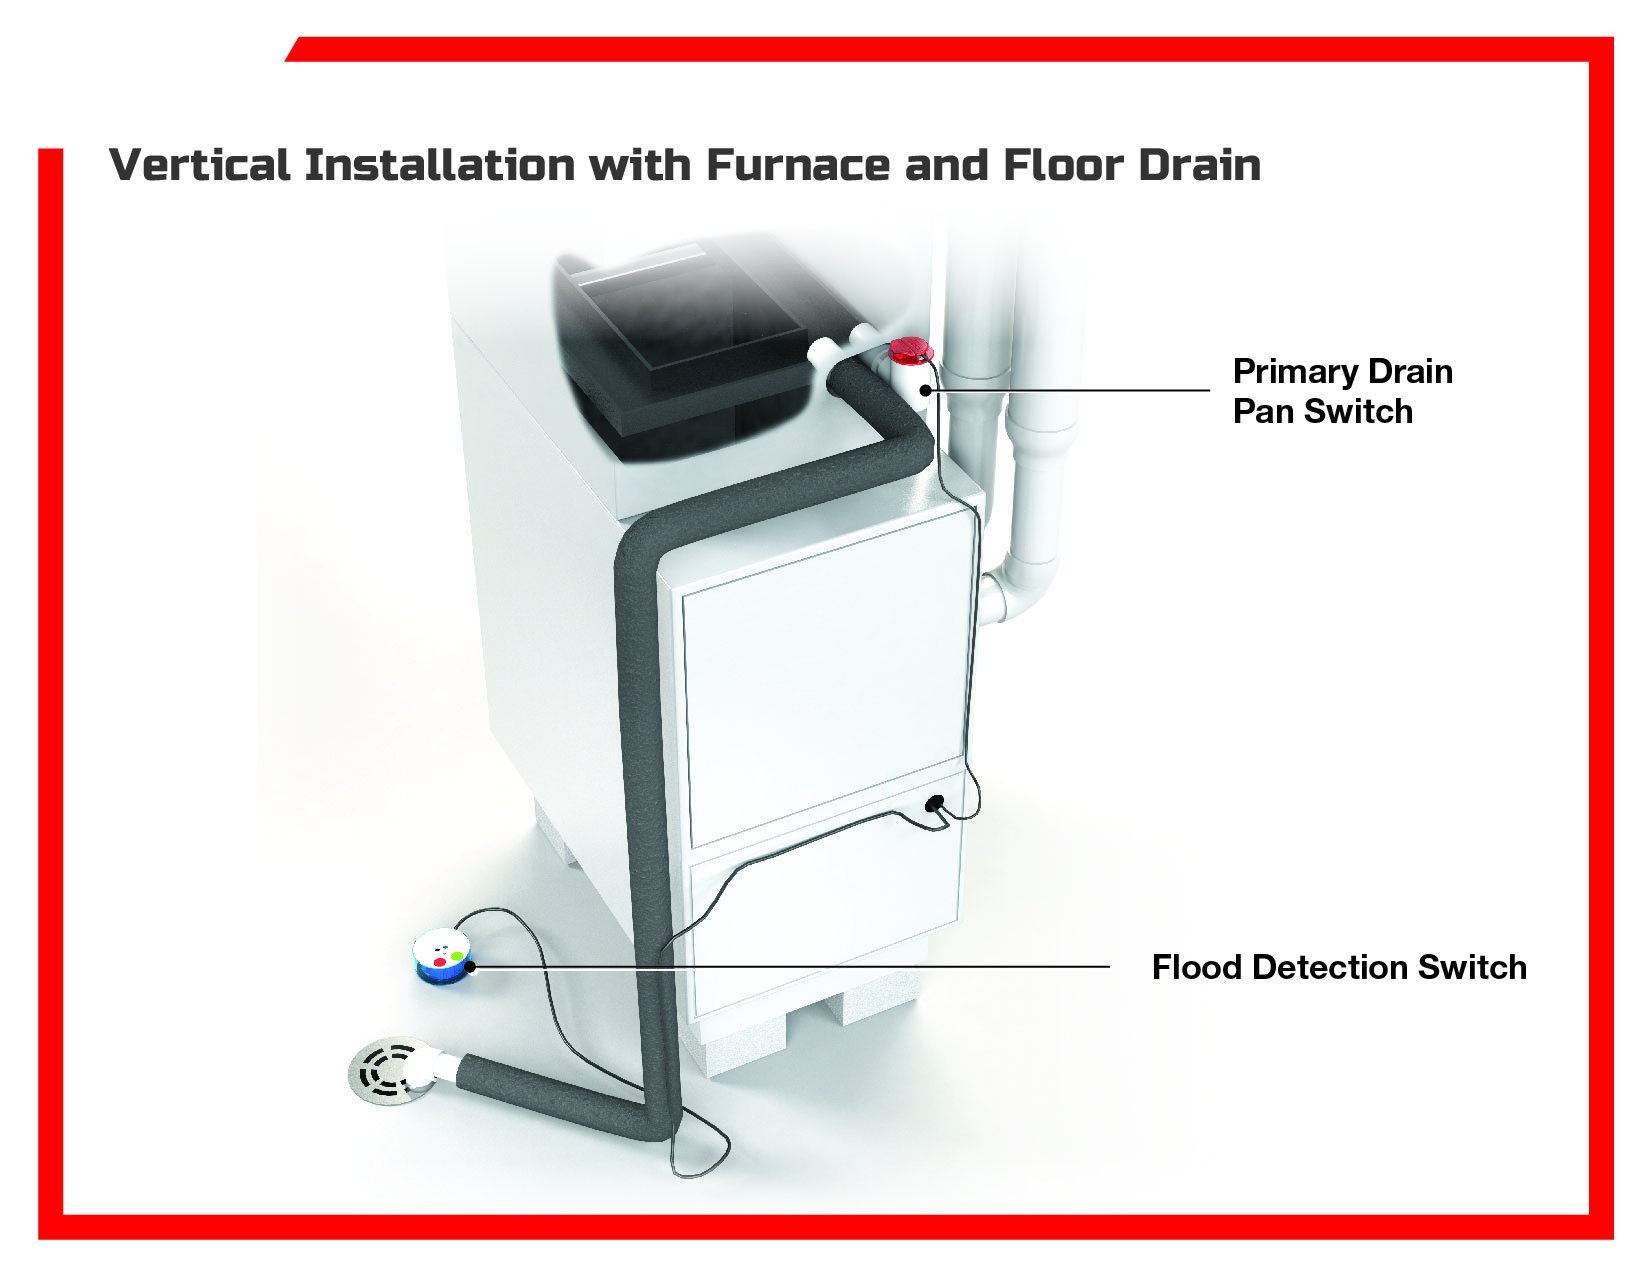 Vertical Installation with Furnace and Floor Drain